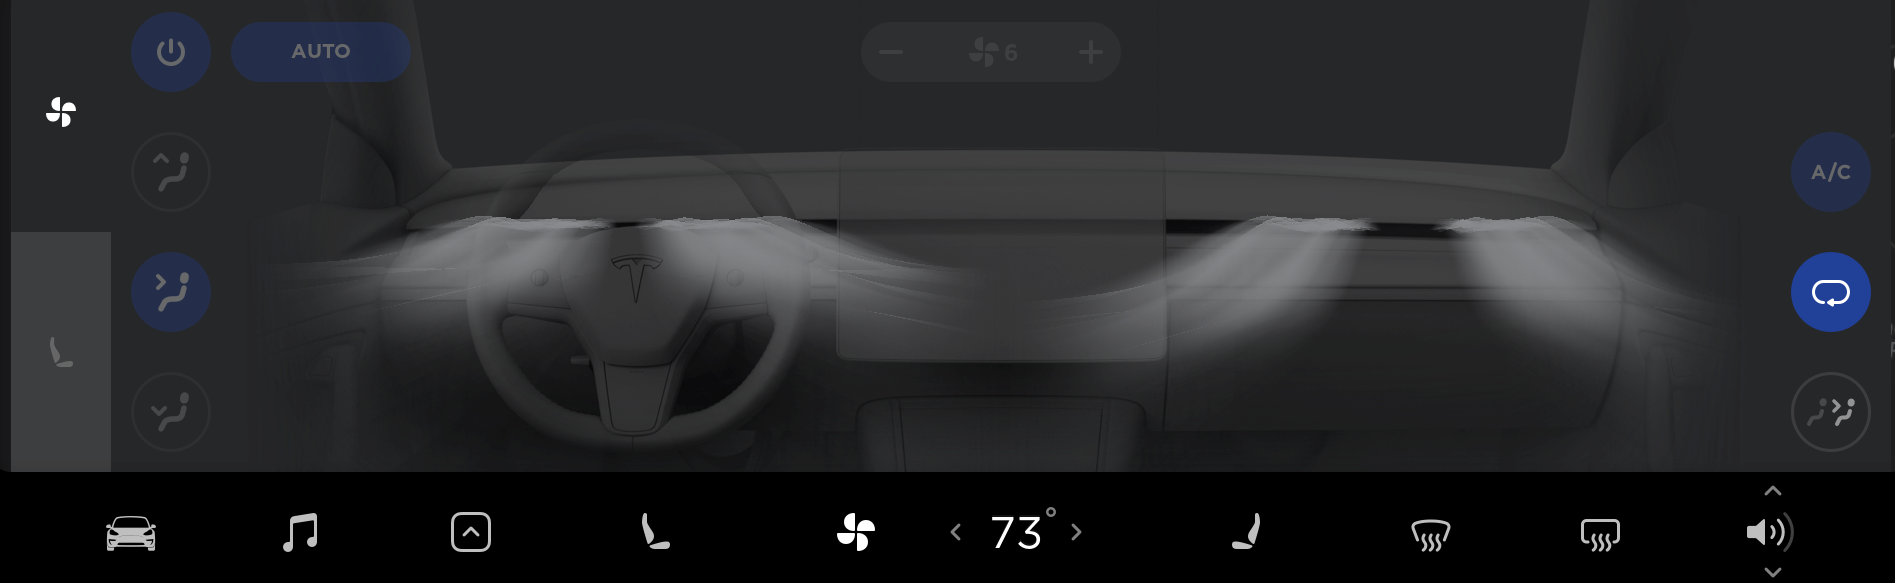 Tesla Climate Control feature in update 2018.39.2.1